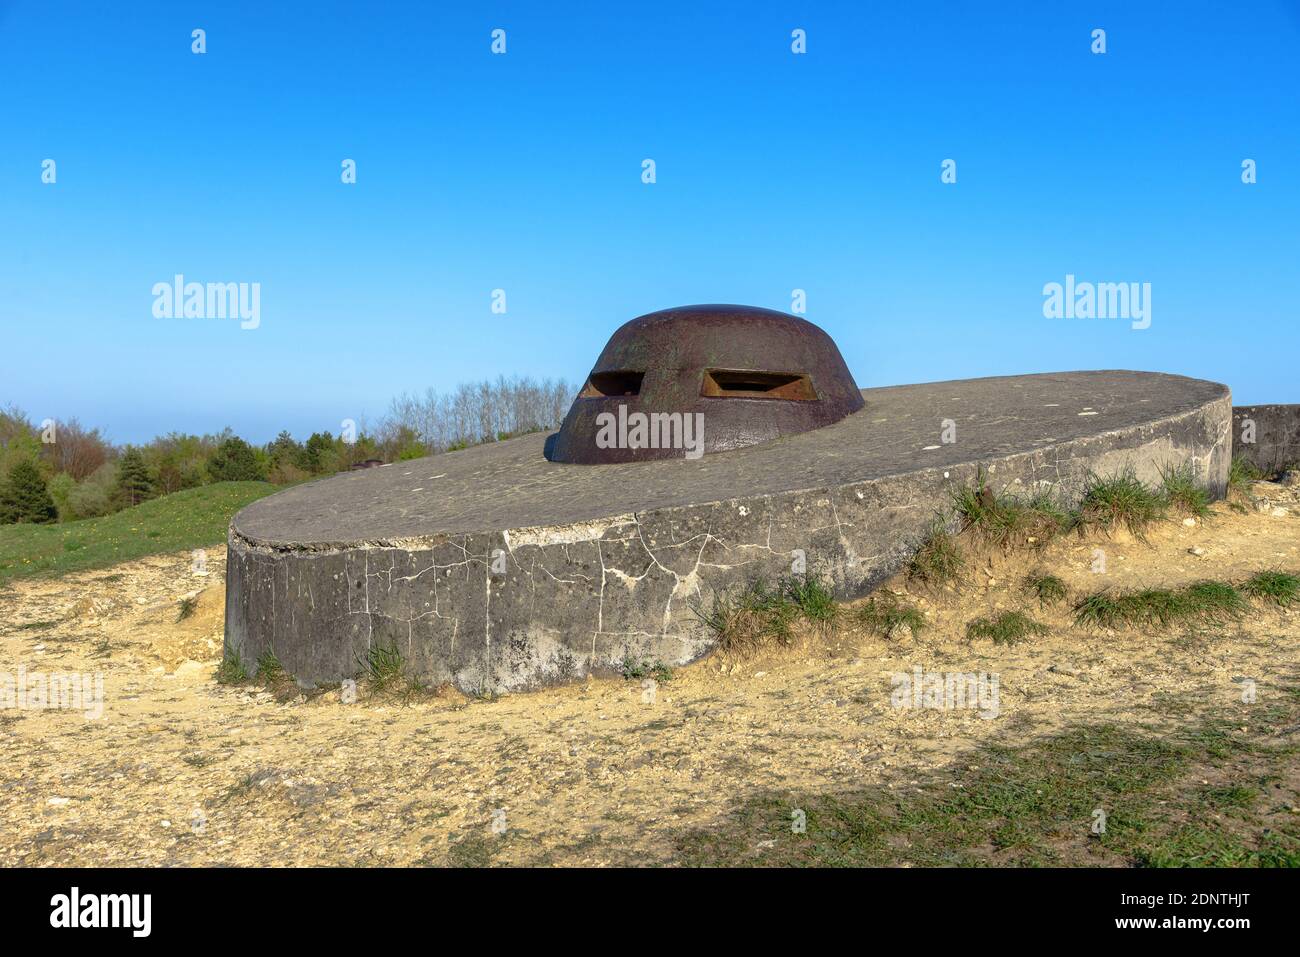 The tops of a bunker at the remains of Fort Douaumont from the Battle of Verdun, France Stock Photo